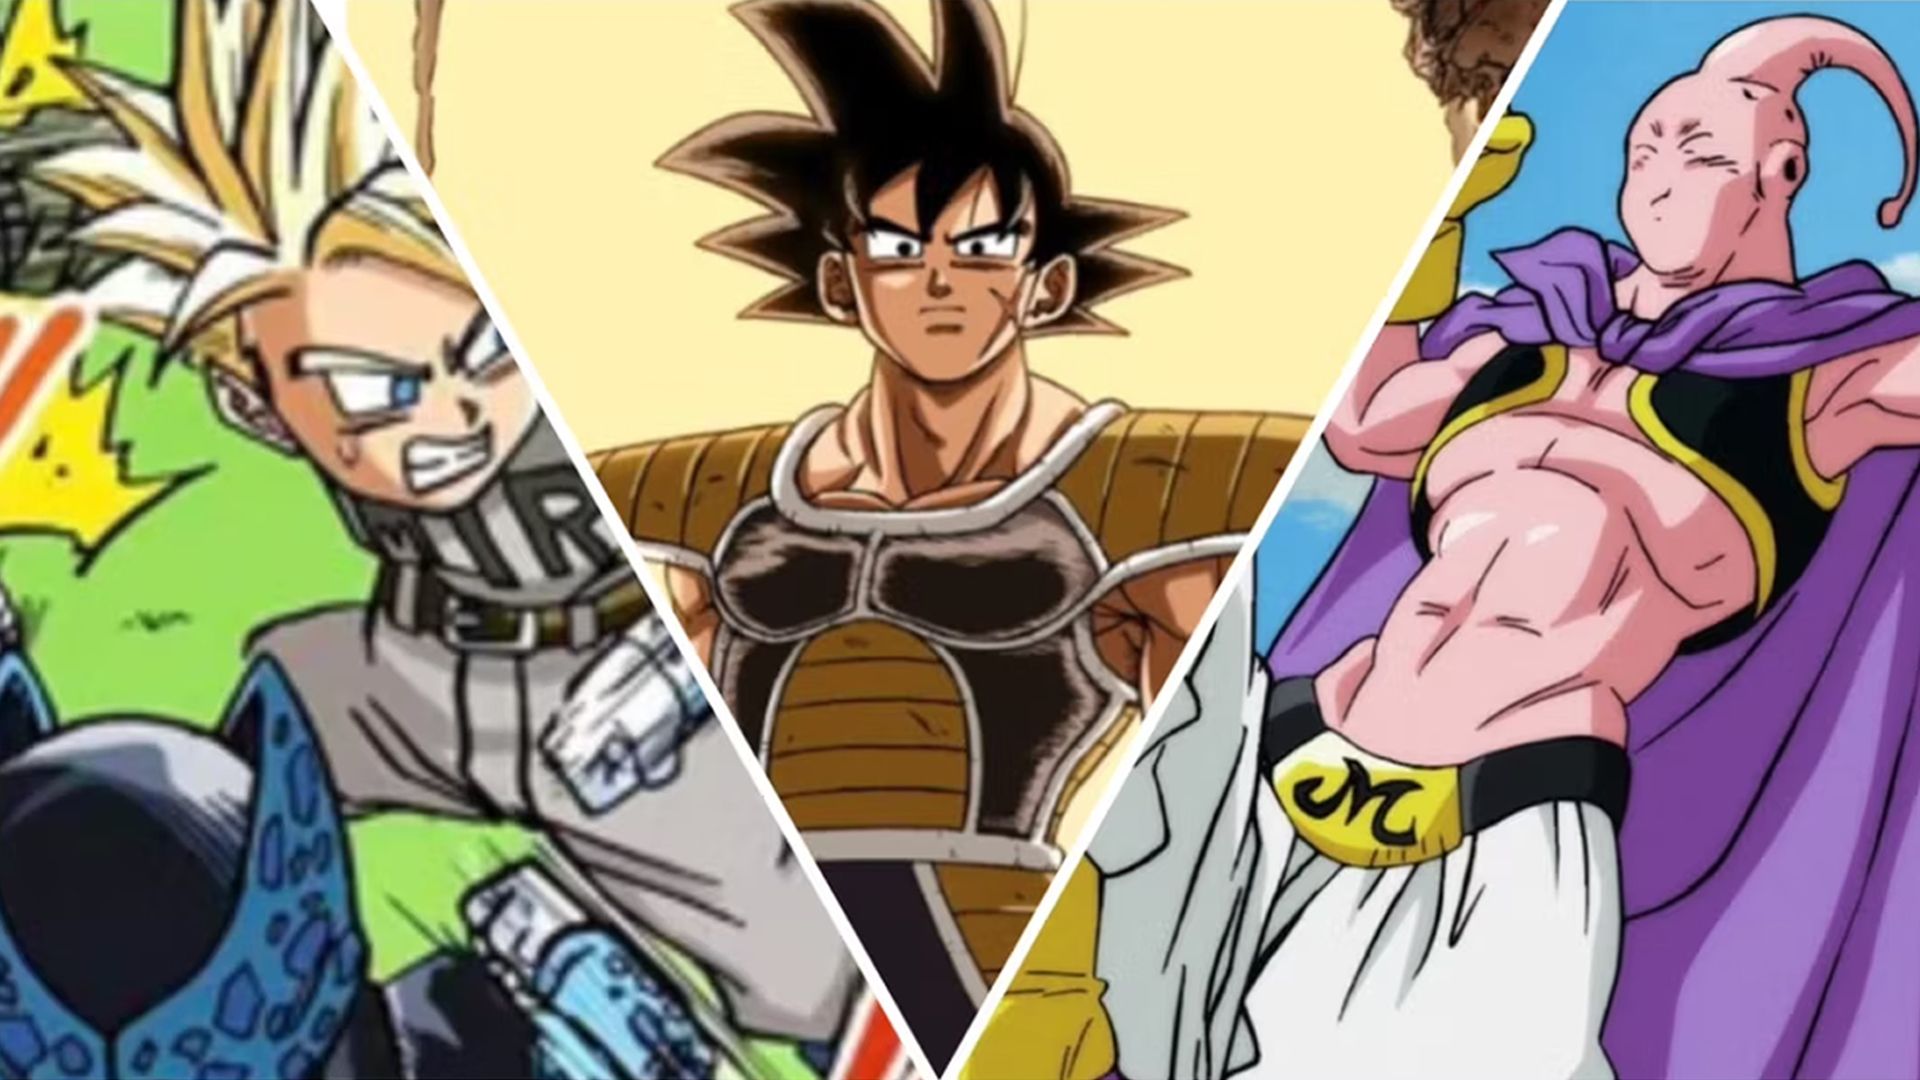 Why did trunk's ssj hair style change at the end of the cell saga? : r/dbz